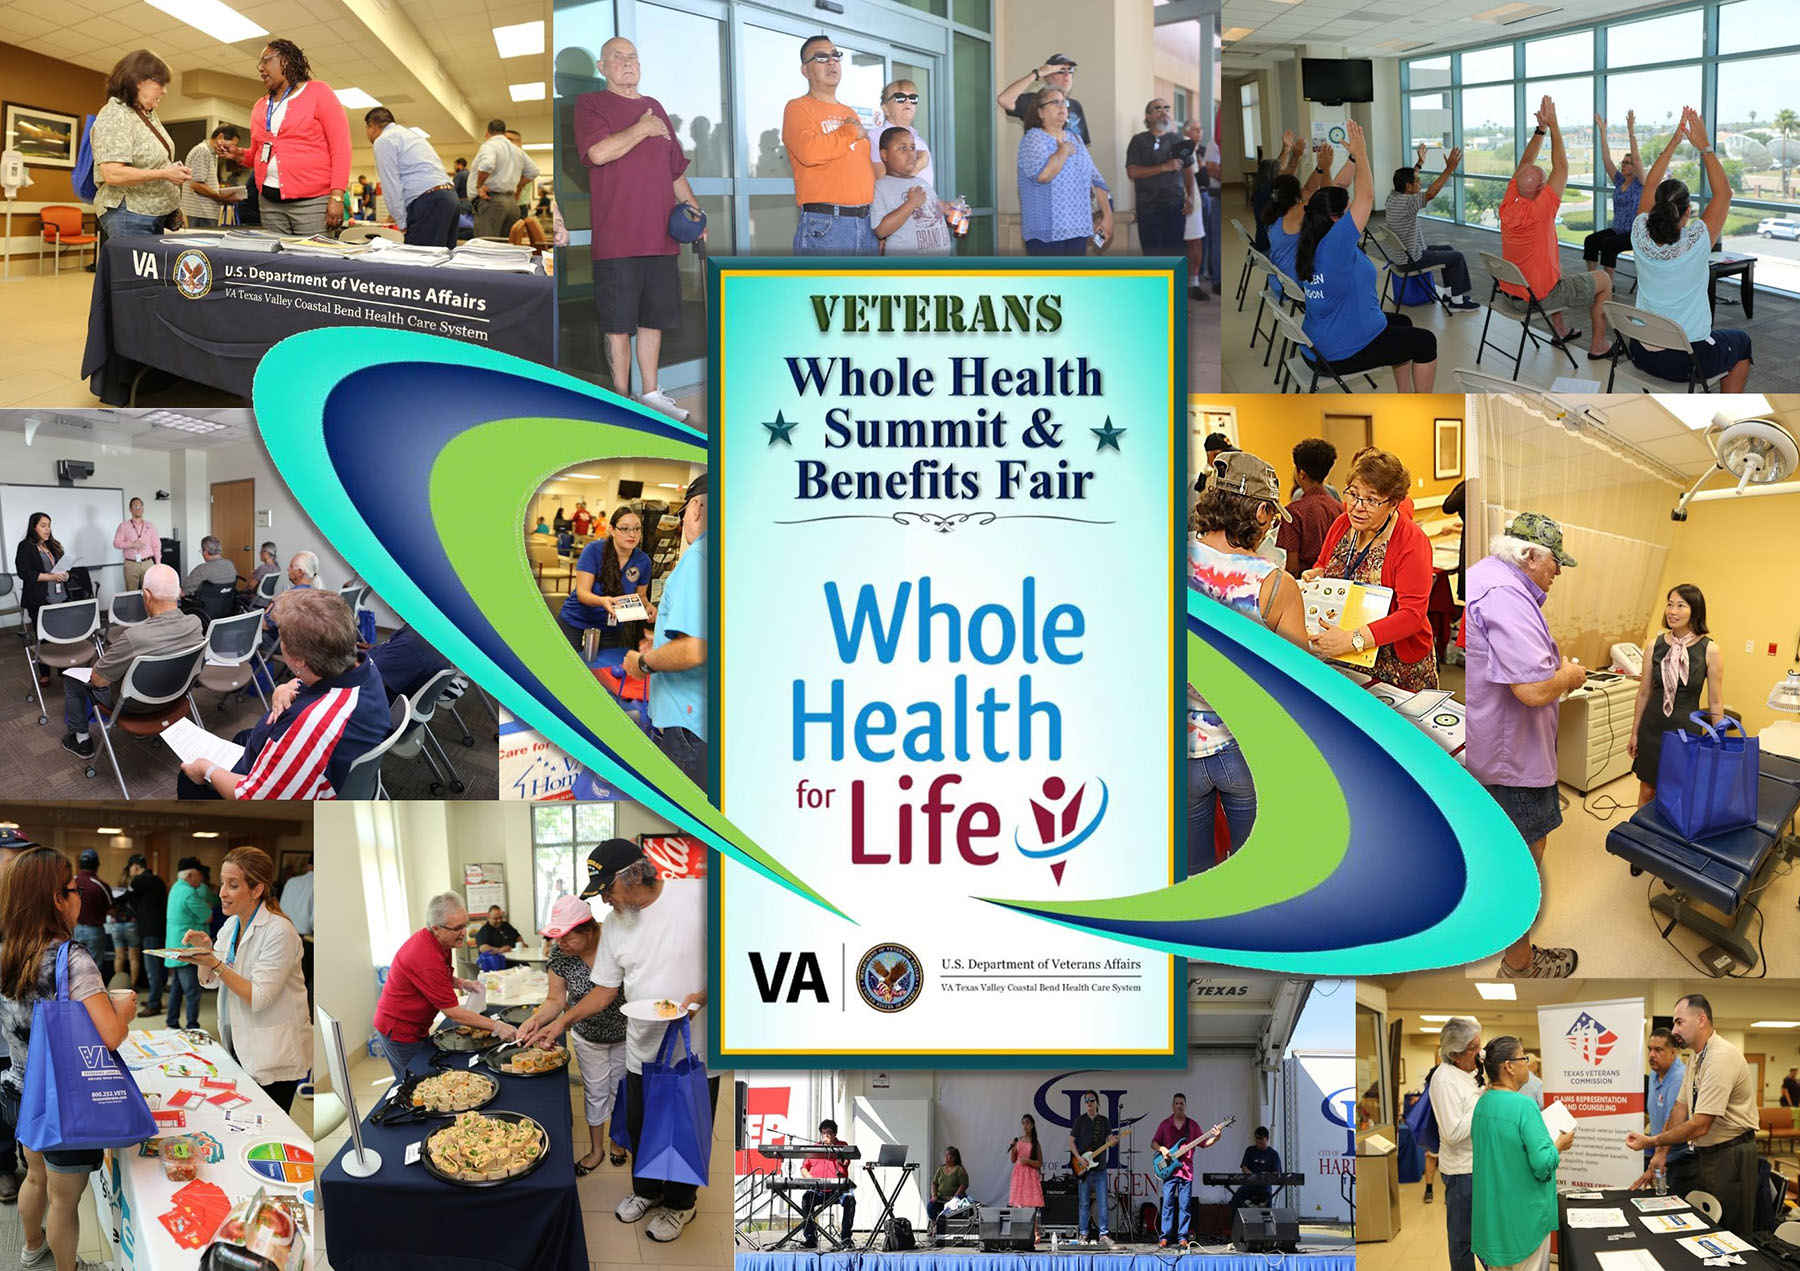 VA Texas Valley Coastal Bend Health Care System (VCB) hosted the first ever Veterans Whole Health Summit & Benefits Fair.